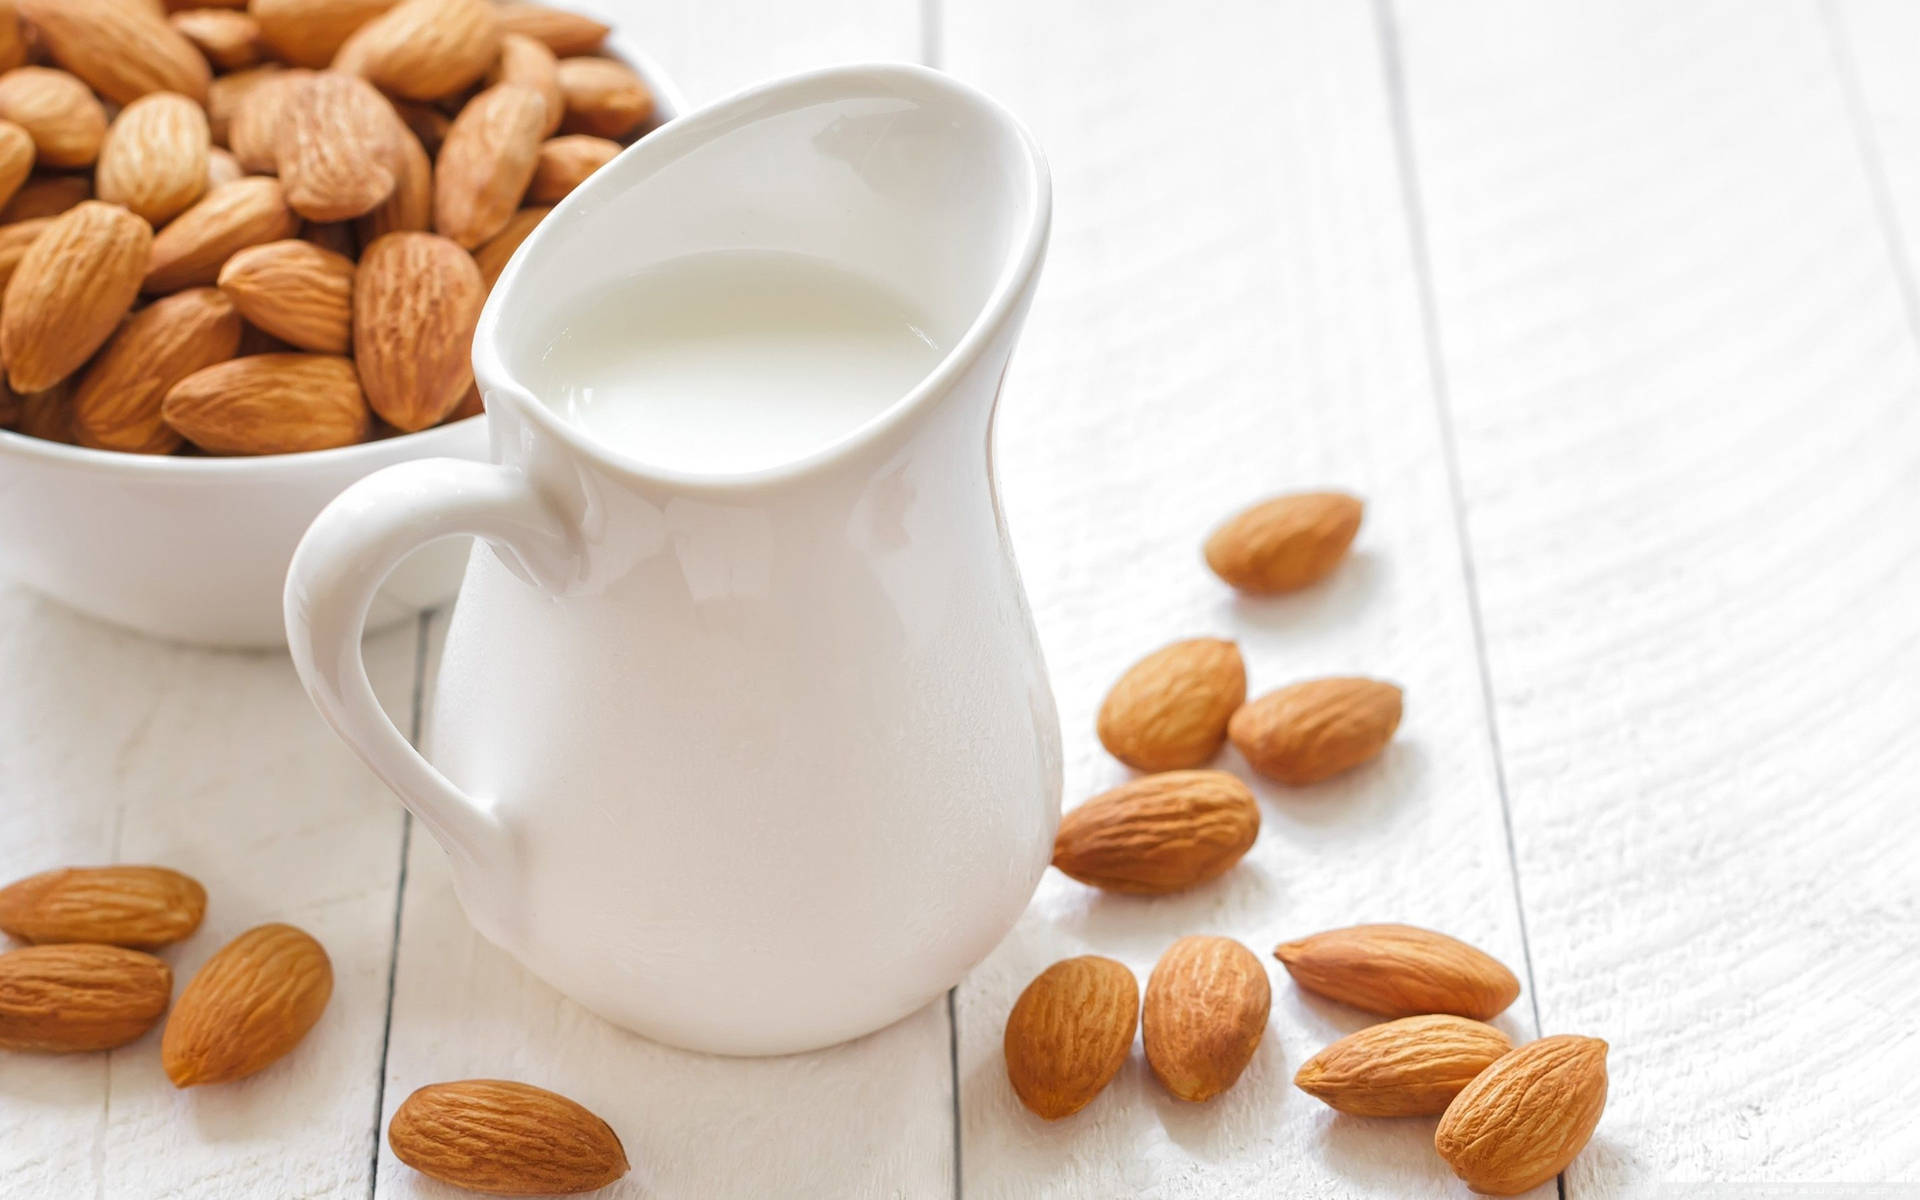 White Pitcher Of Almond Milk With Nuts